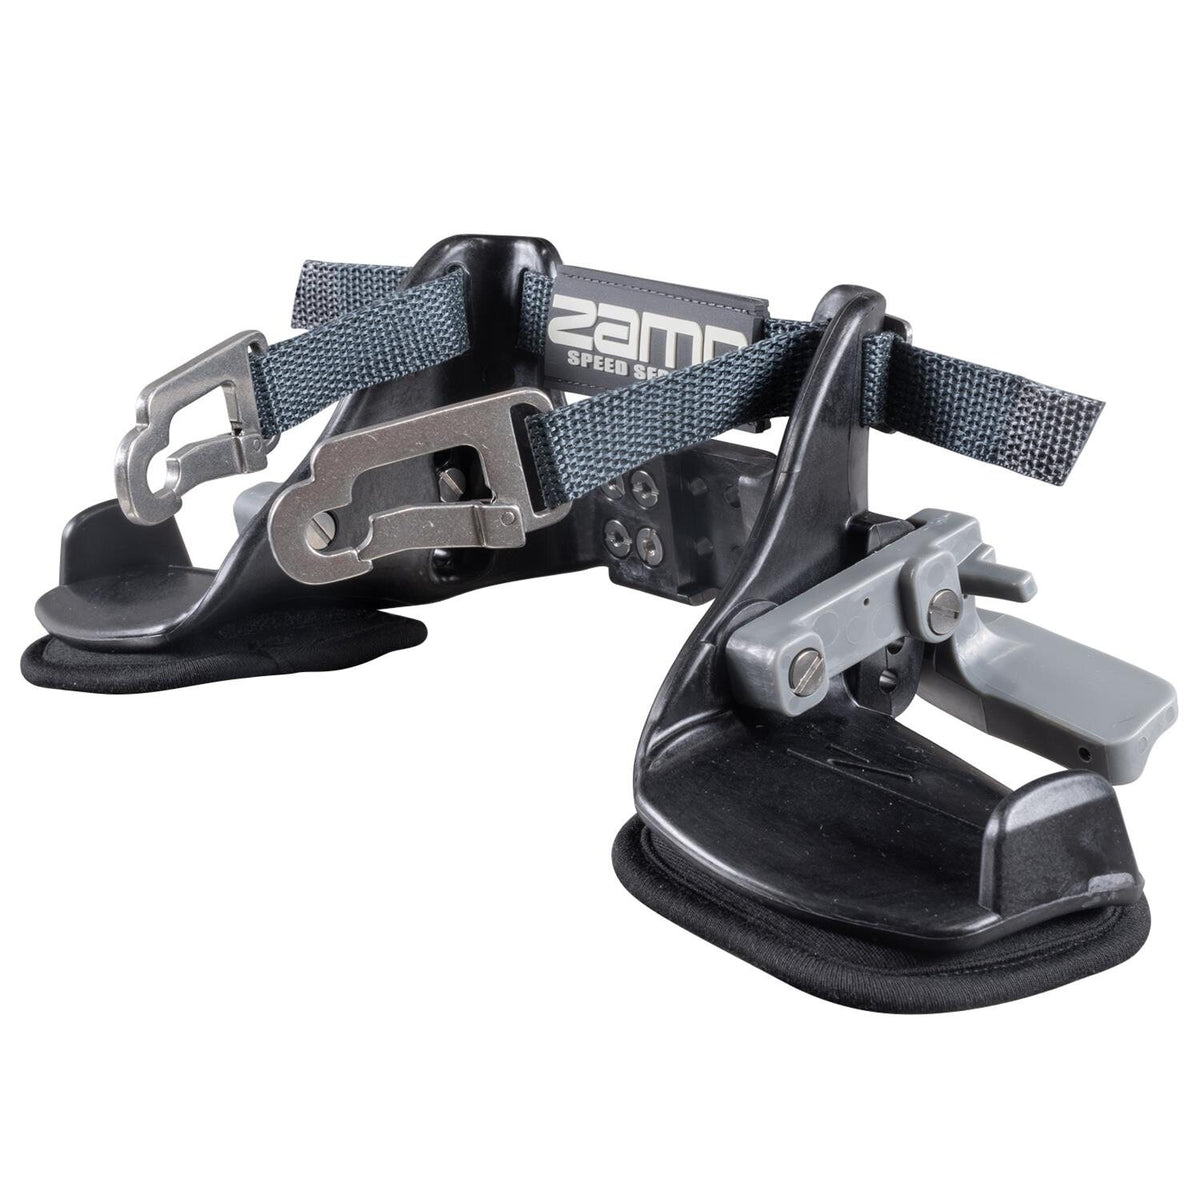 Z-Tech Series 3A Head and Neck Restraint